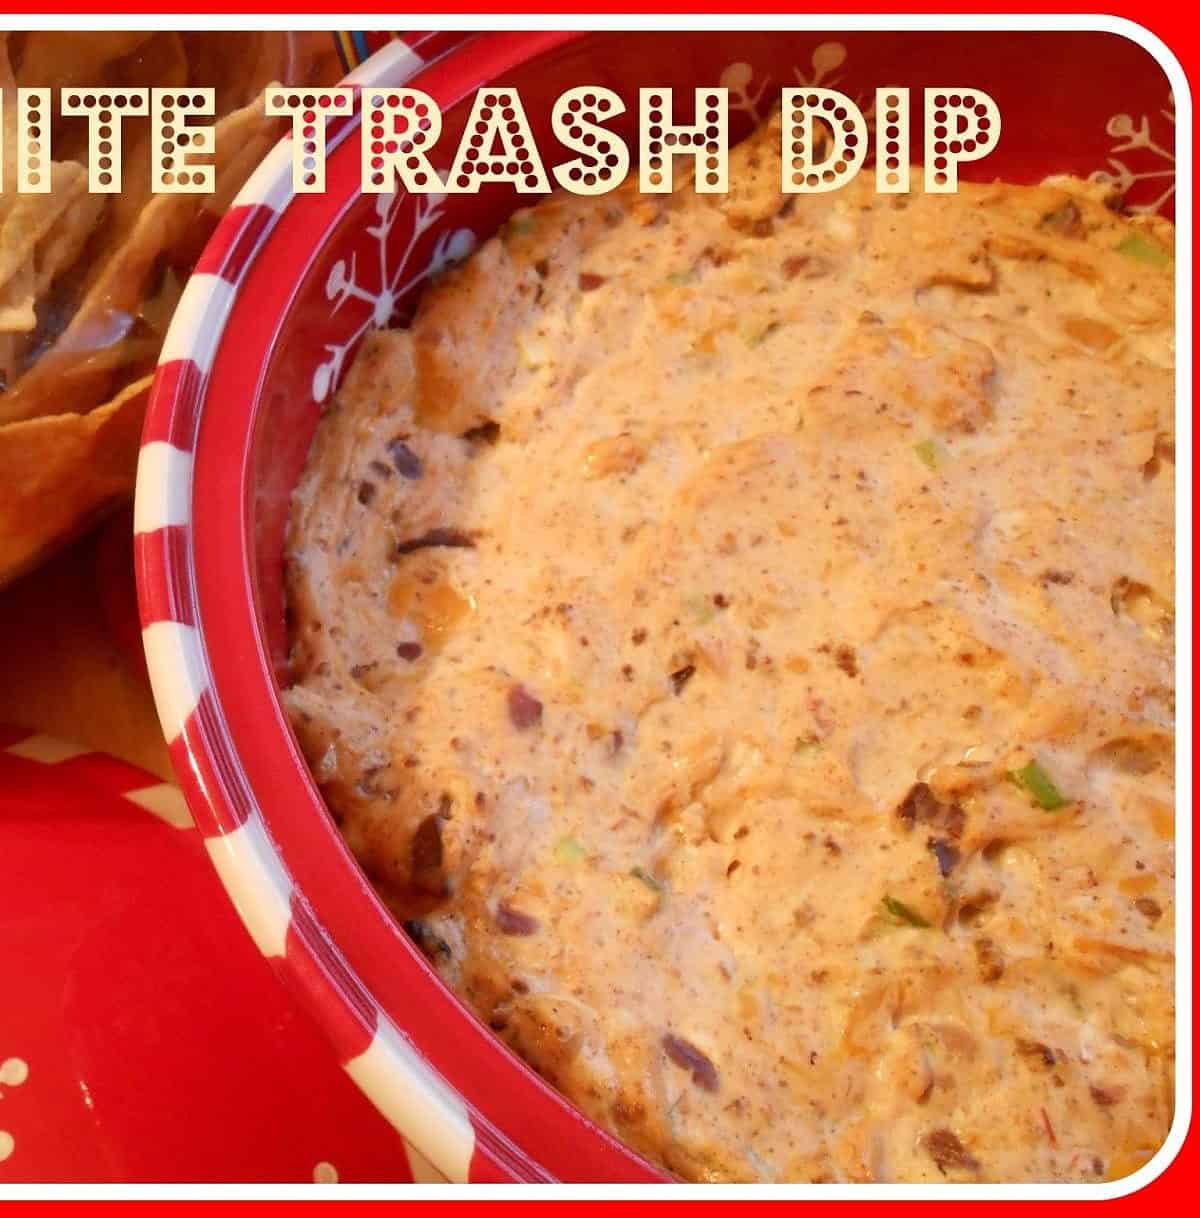  Get ready to be addicted to the cheesy, creamy goodness of this dip.